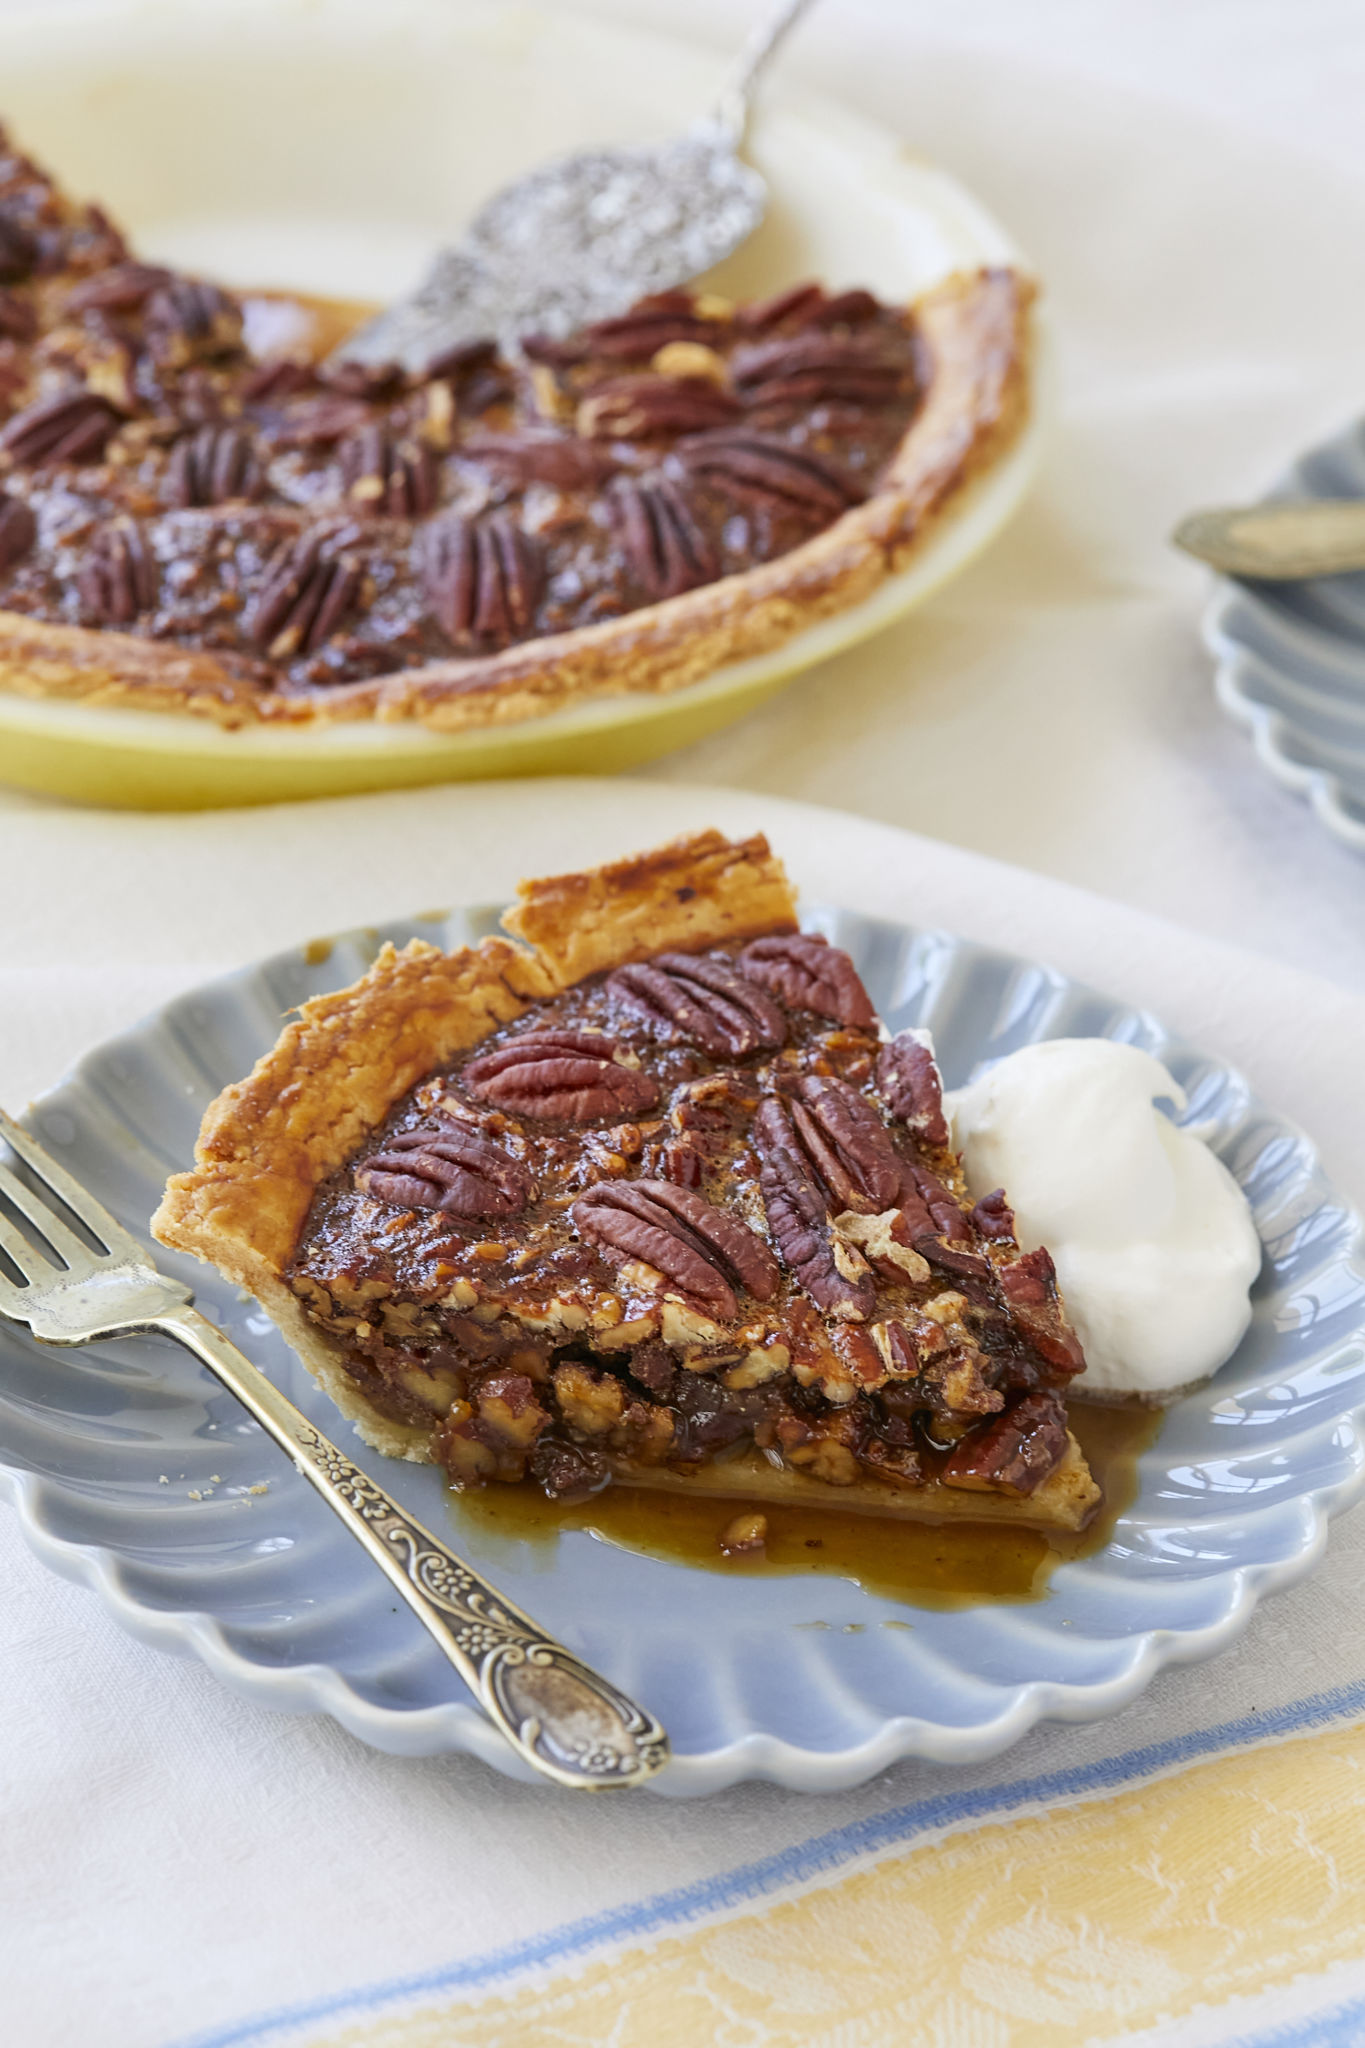 A close up image of a slice of homemade pecan pie shows toasted pecans on top and the caramel center.